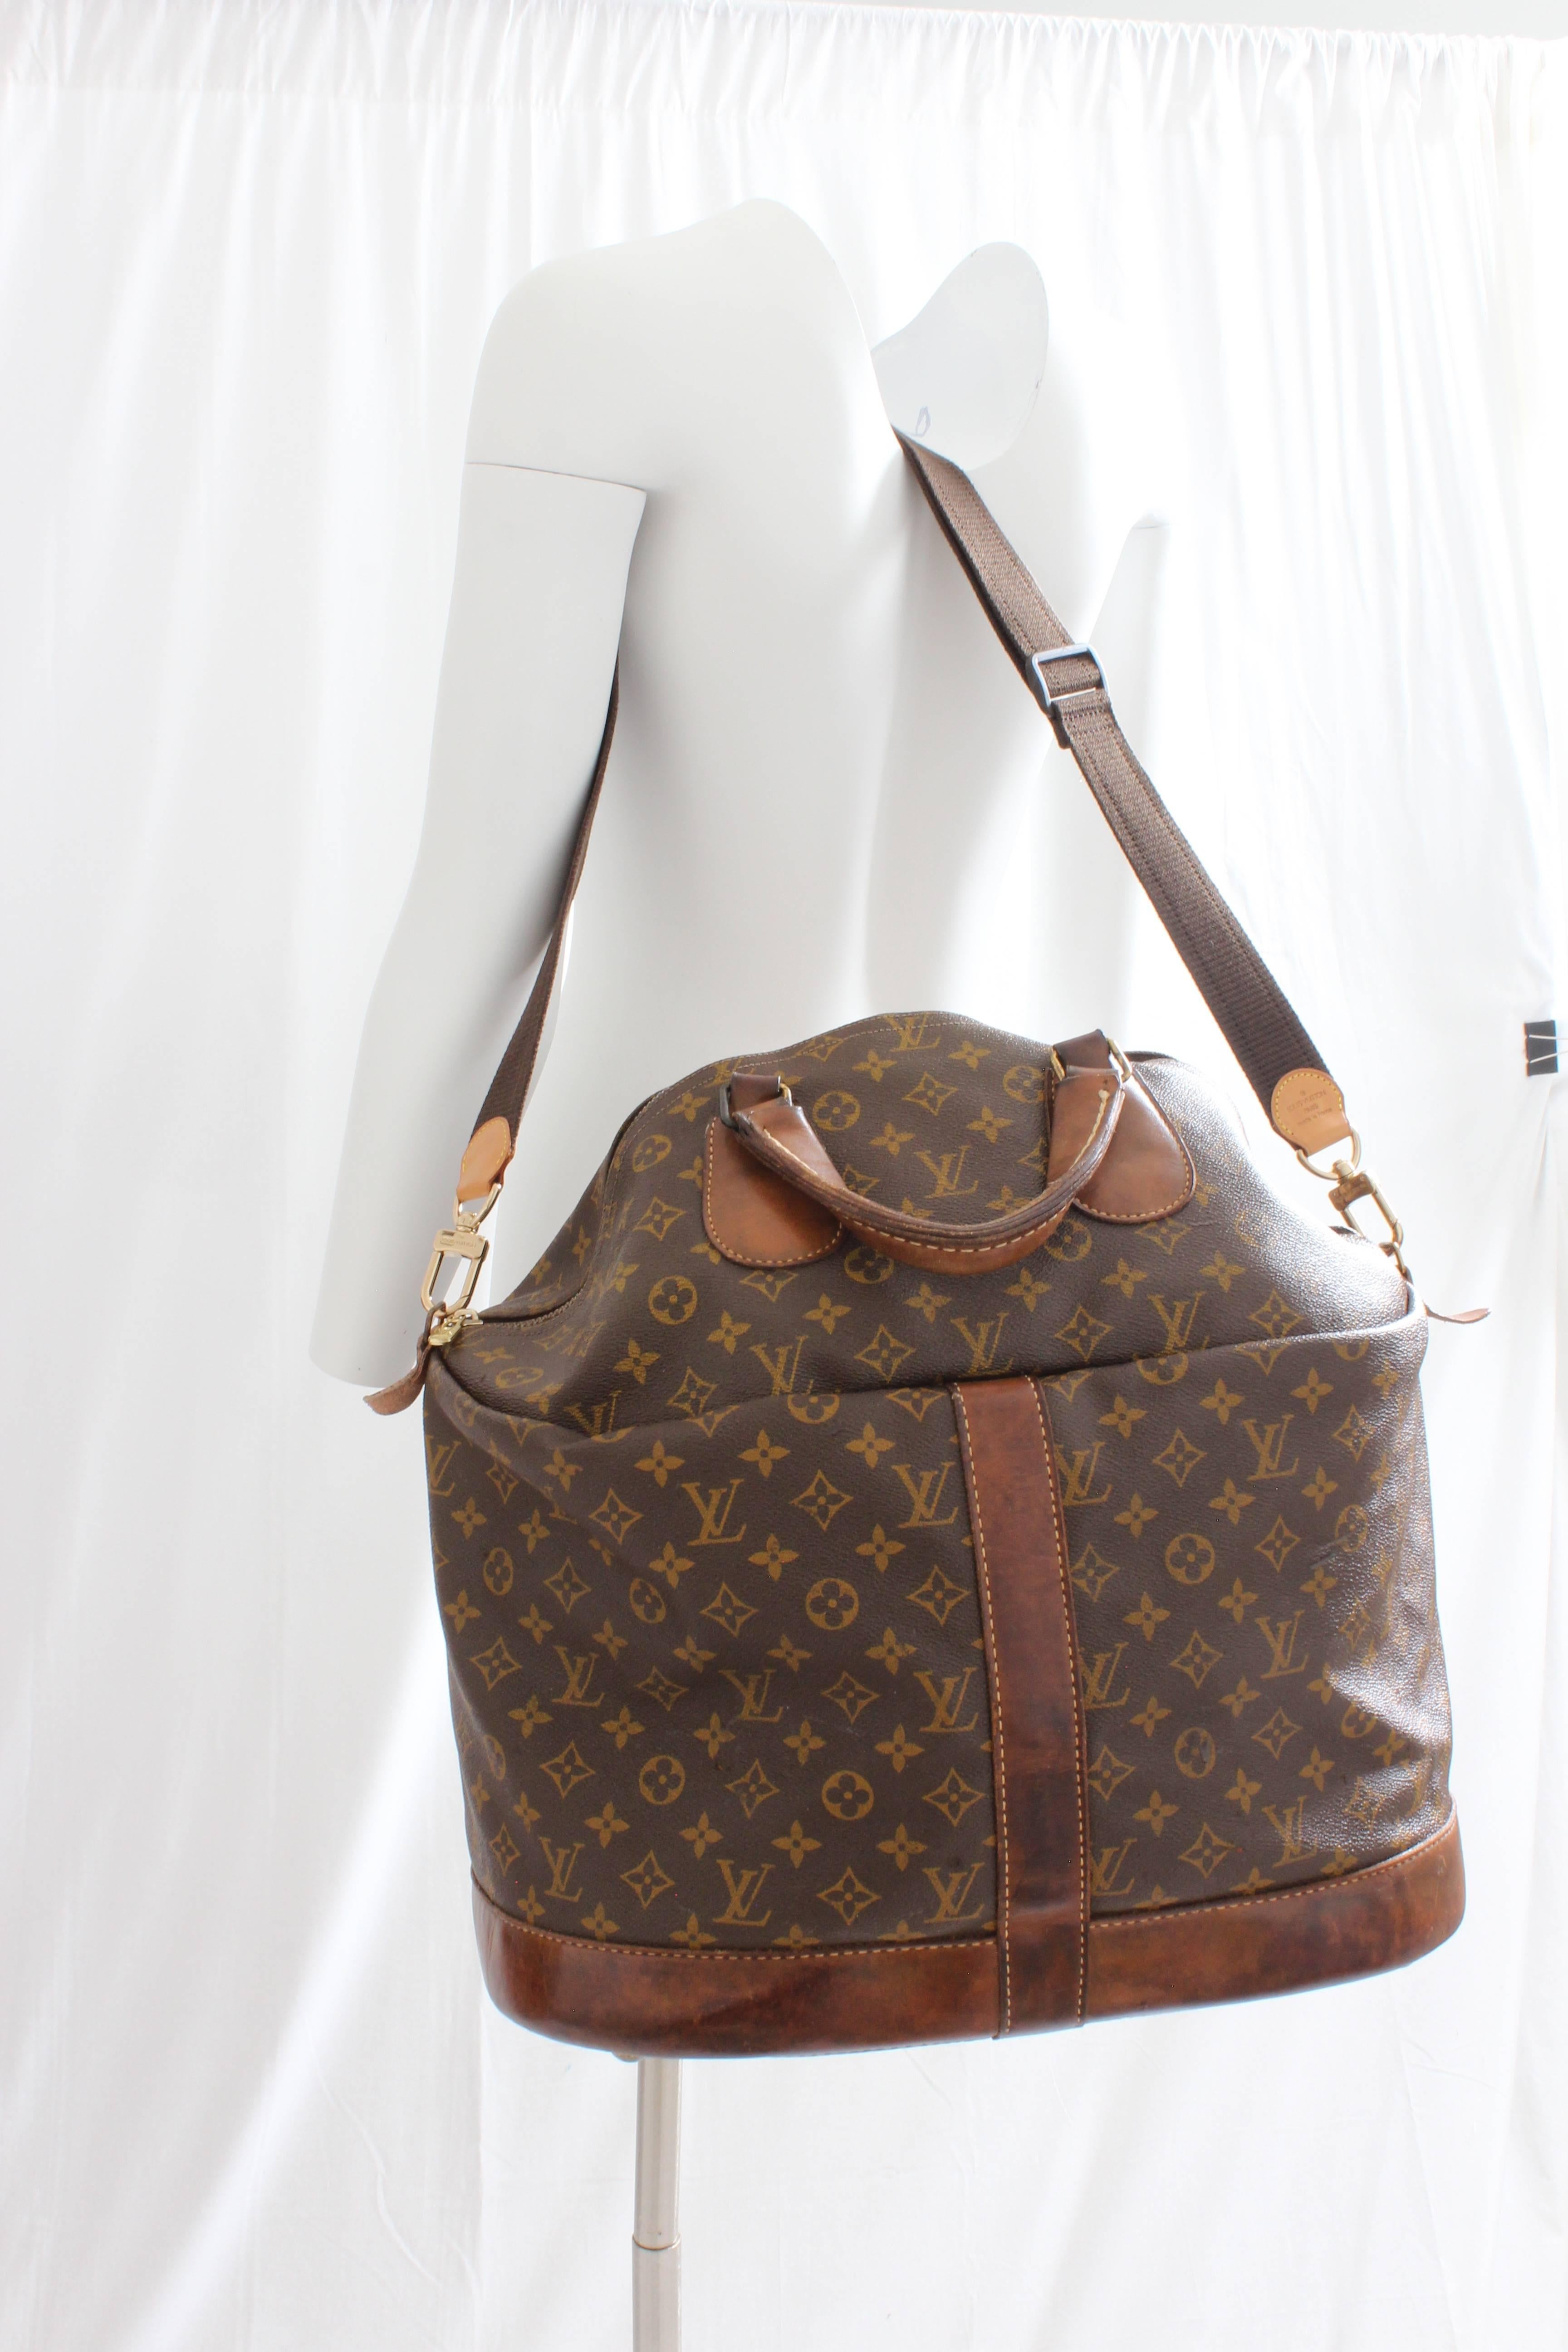 Louis Vuitton Large Steamer Bag Keepall Monogram Travel Tote French Company 70s  4